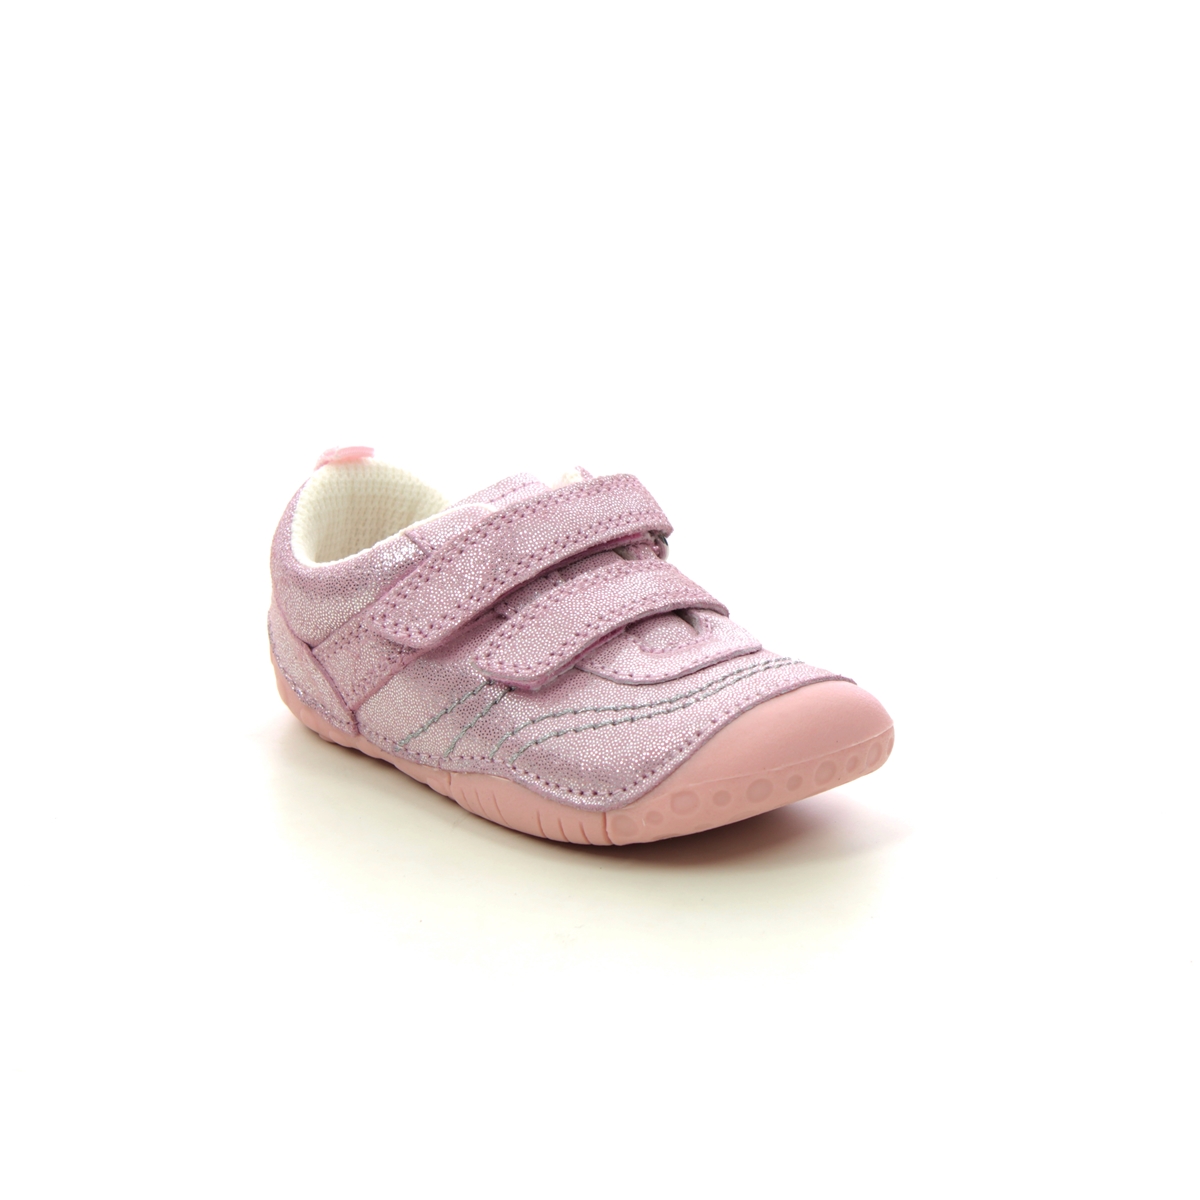 Start Rite Little Smile 2v Pink Glitter Kids girls first and baby shoes 0823-67G in a Plain  in Size 5